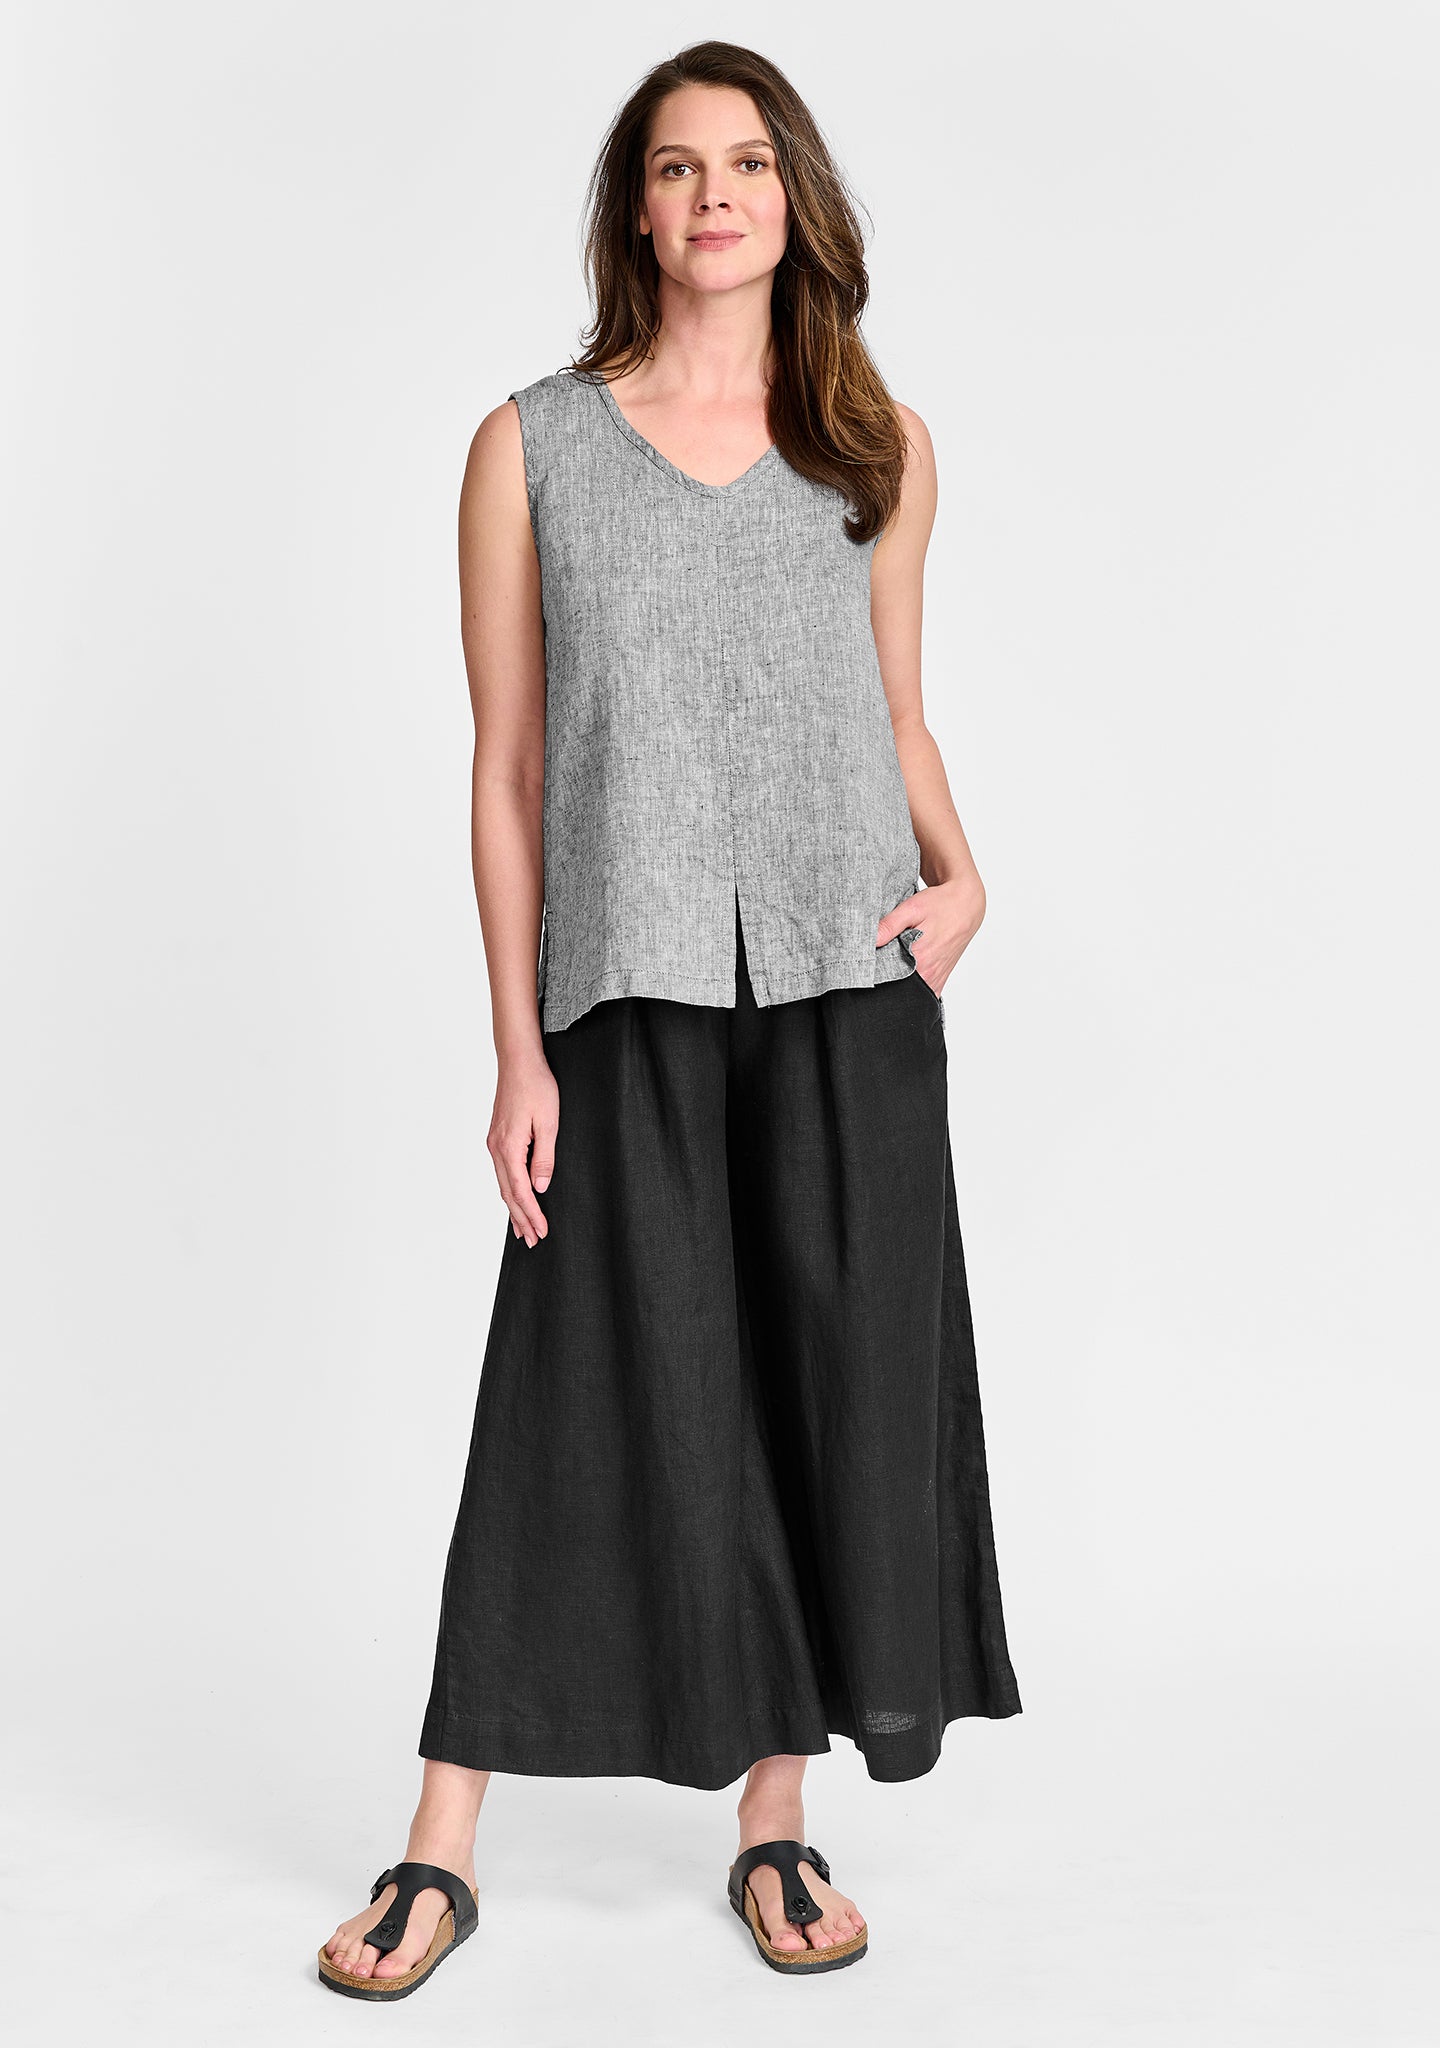 FLAX linen tank in grey with linen pants in black